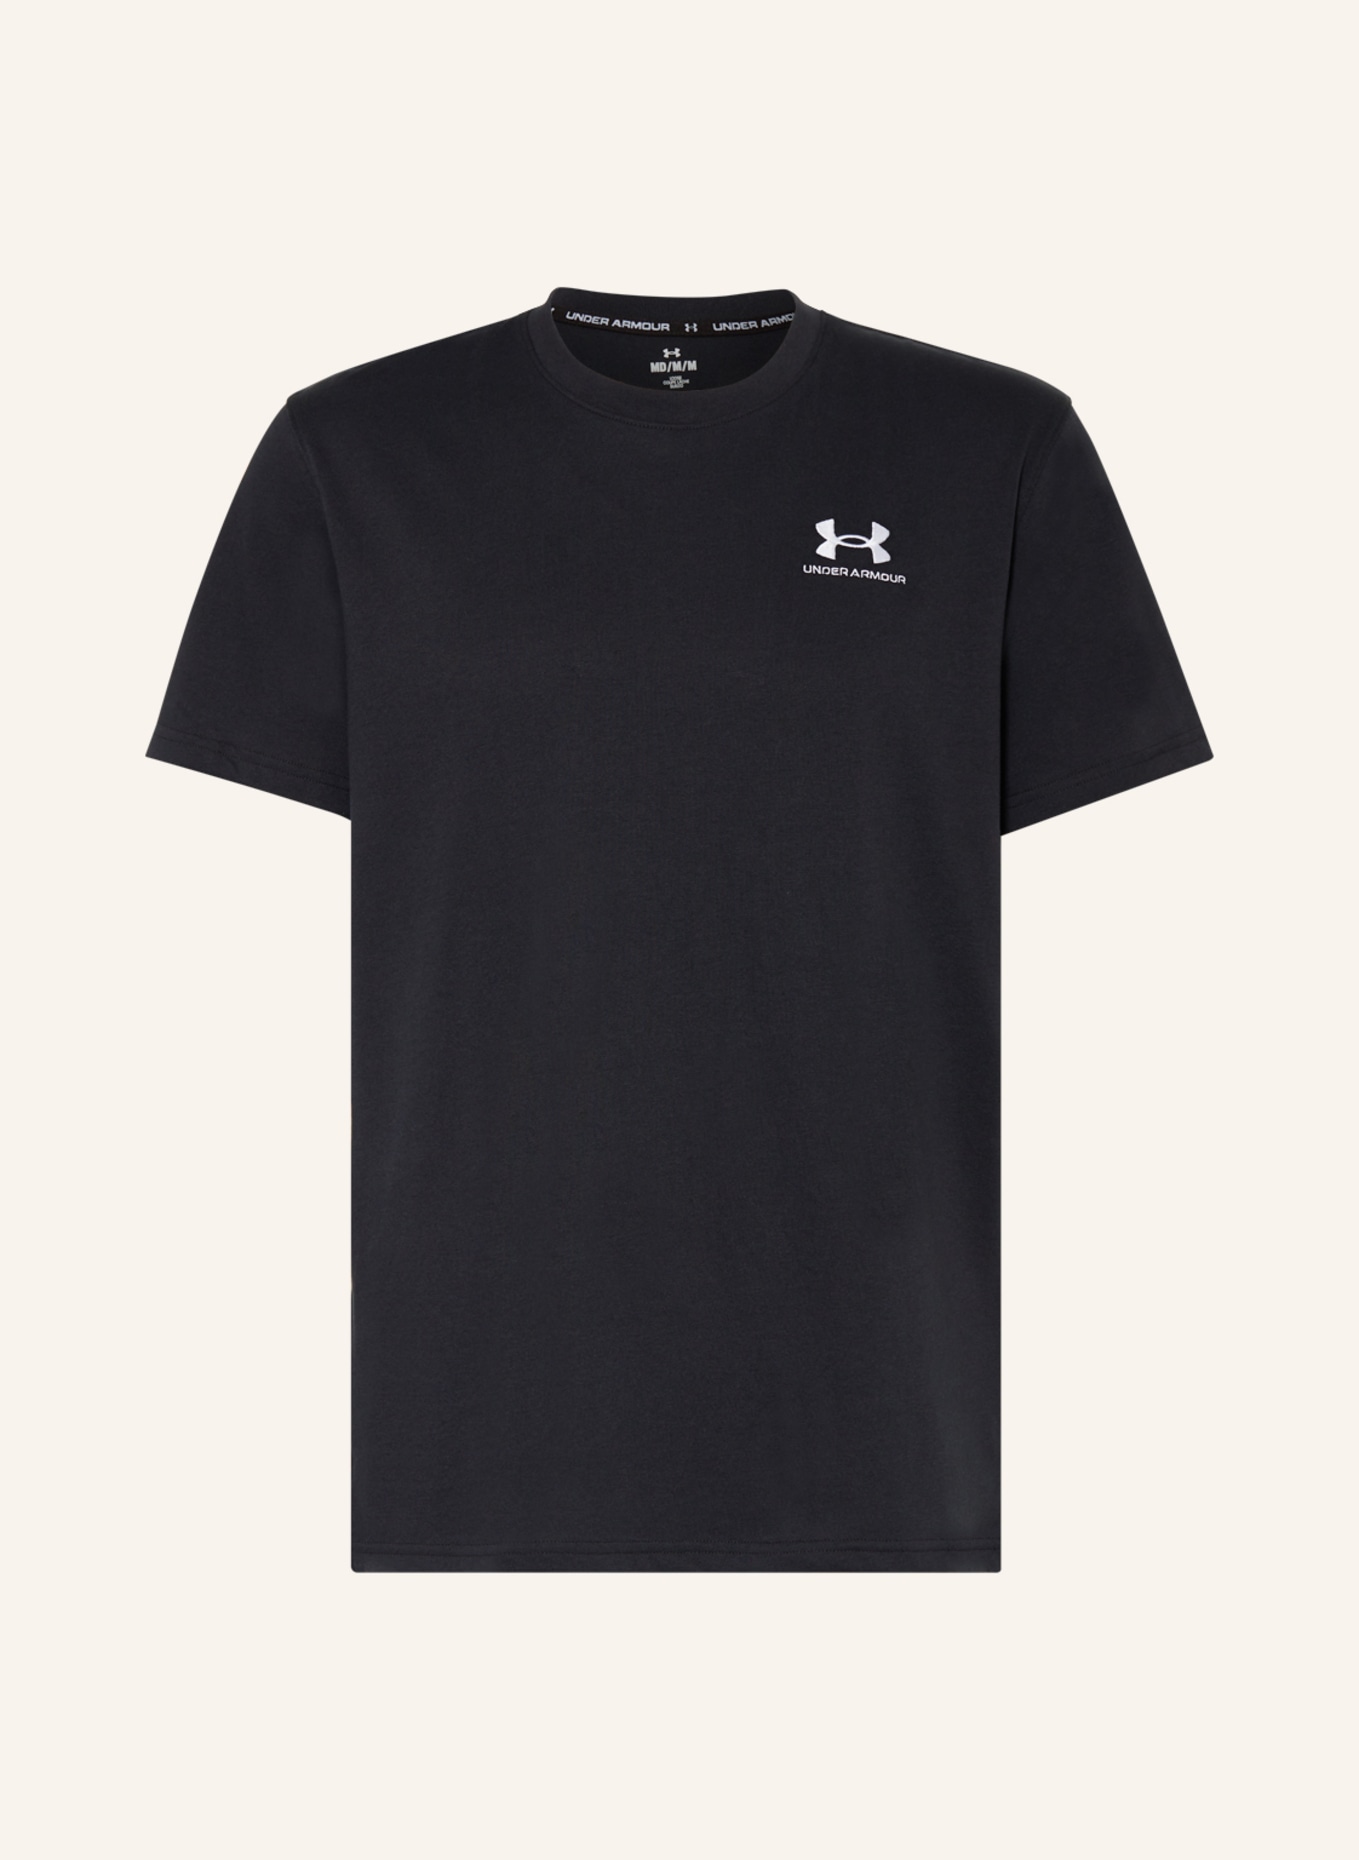 UNDER ARMOUR T-shirt HEAVYWEIGHT, Color: BLACK (Image 1)